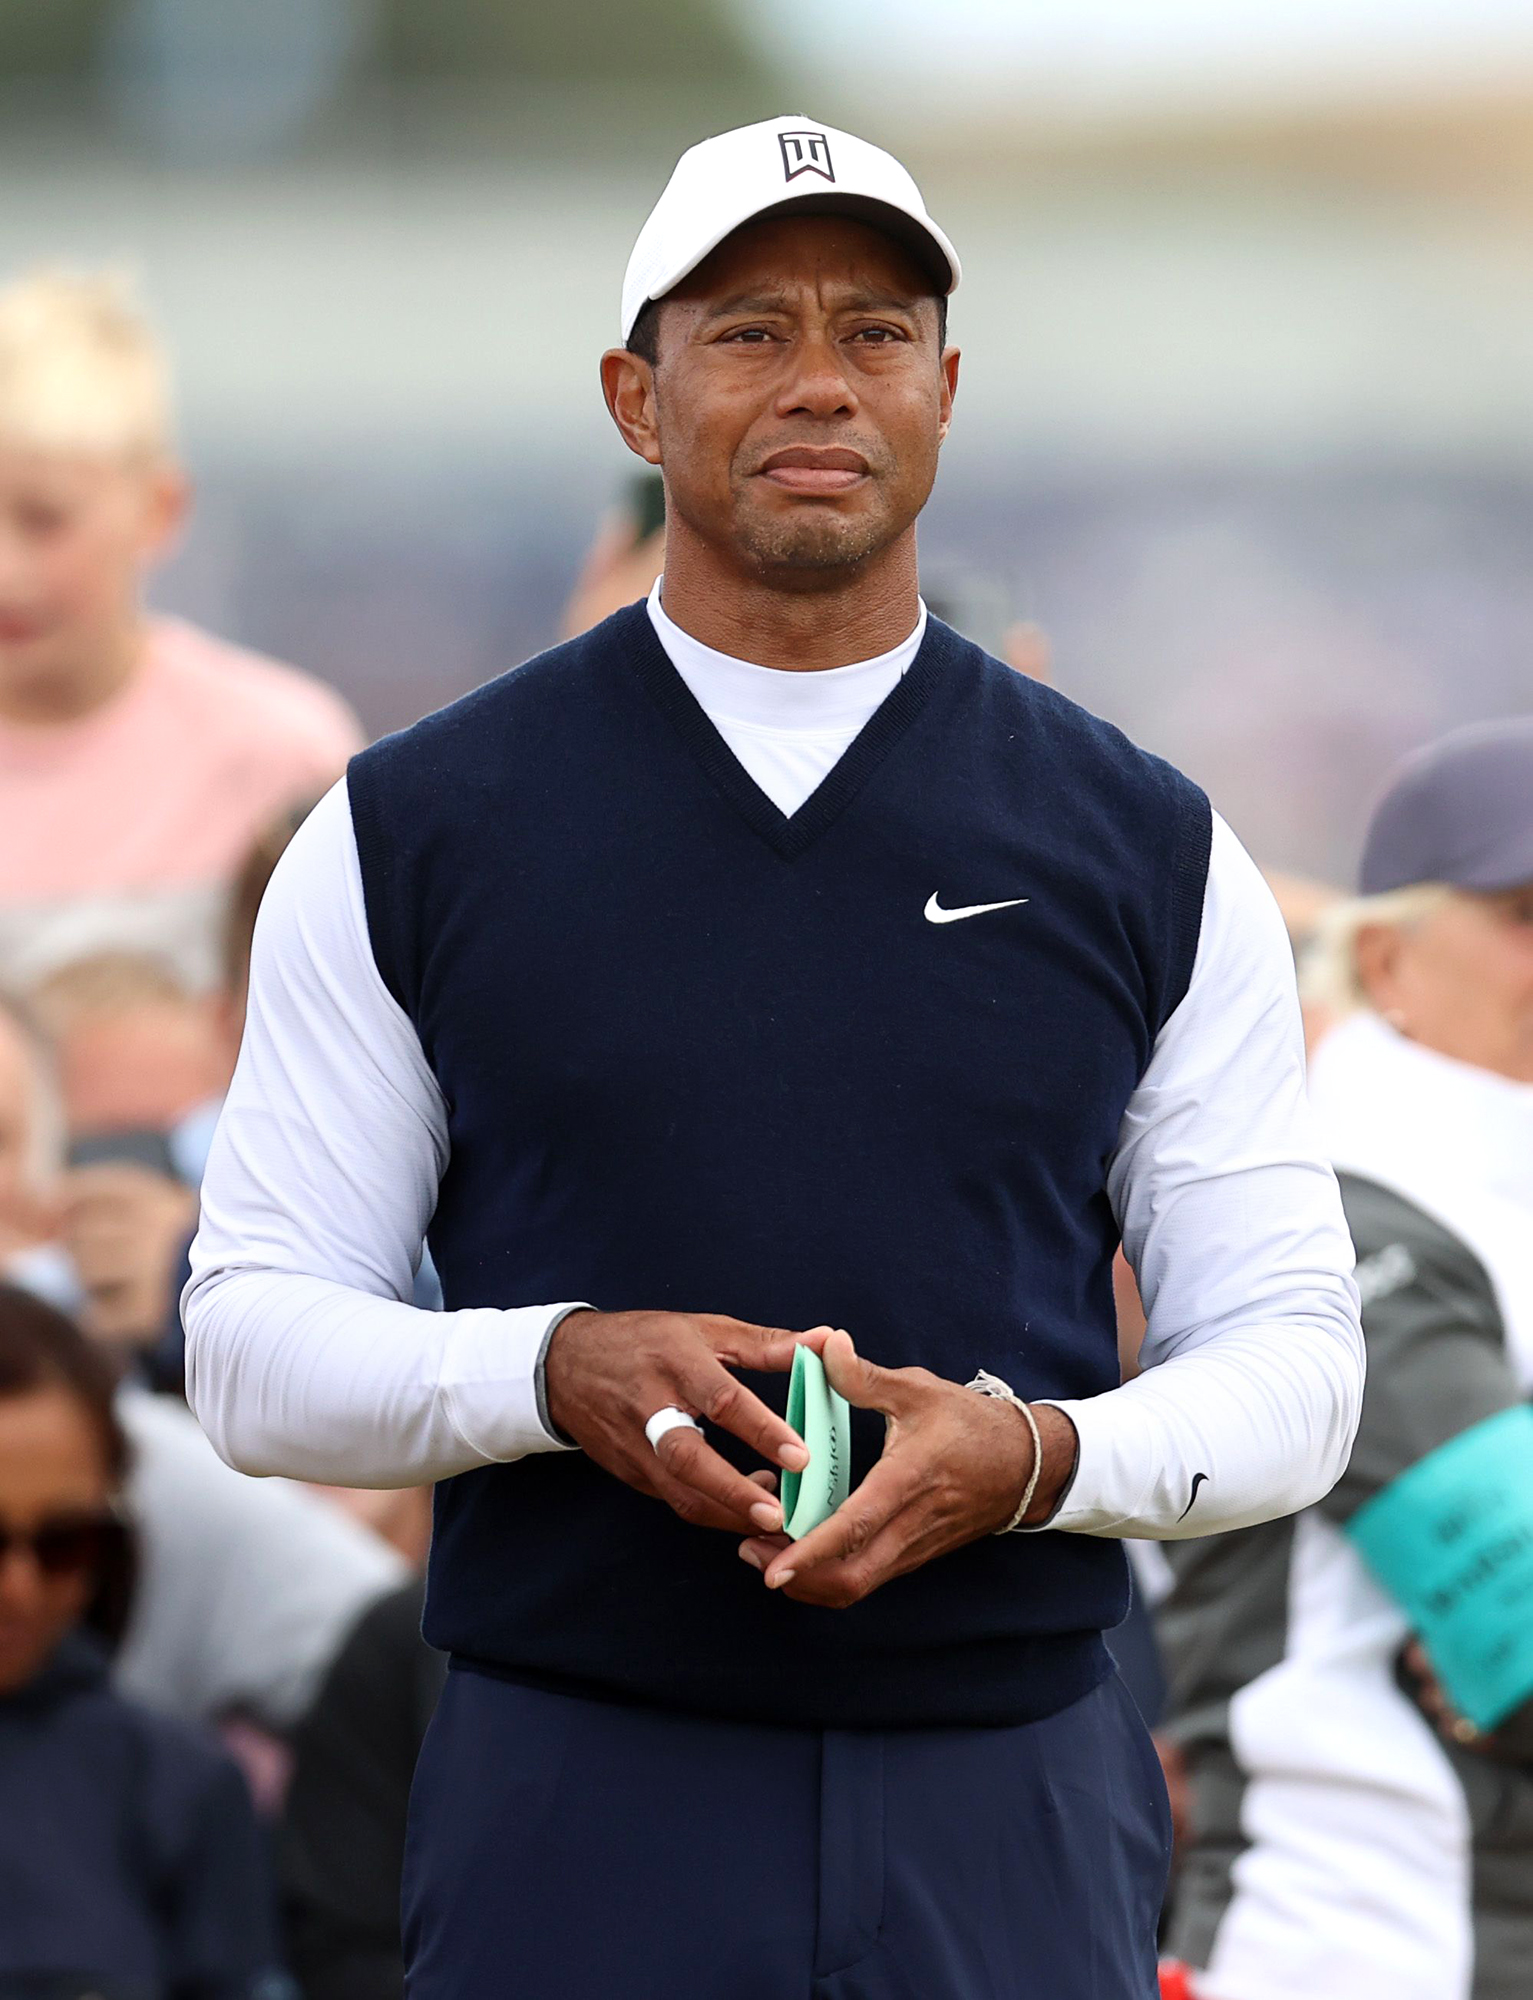 Tiger Woods Feels 'Disappointed' to Withdraw From Masters After Foot Injury